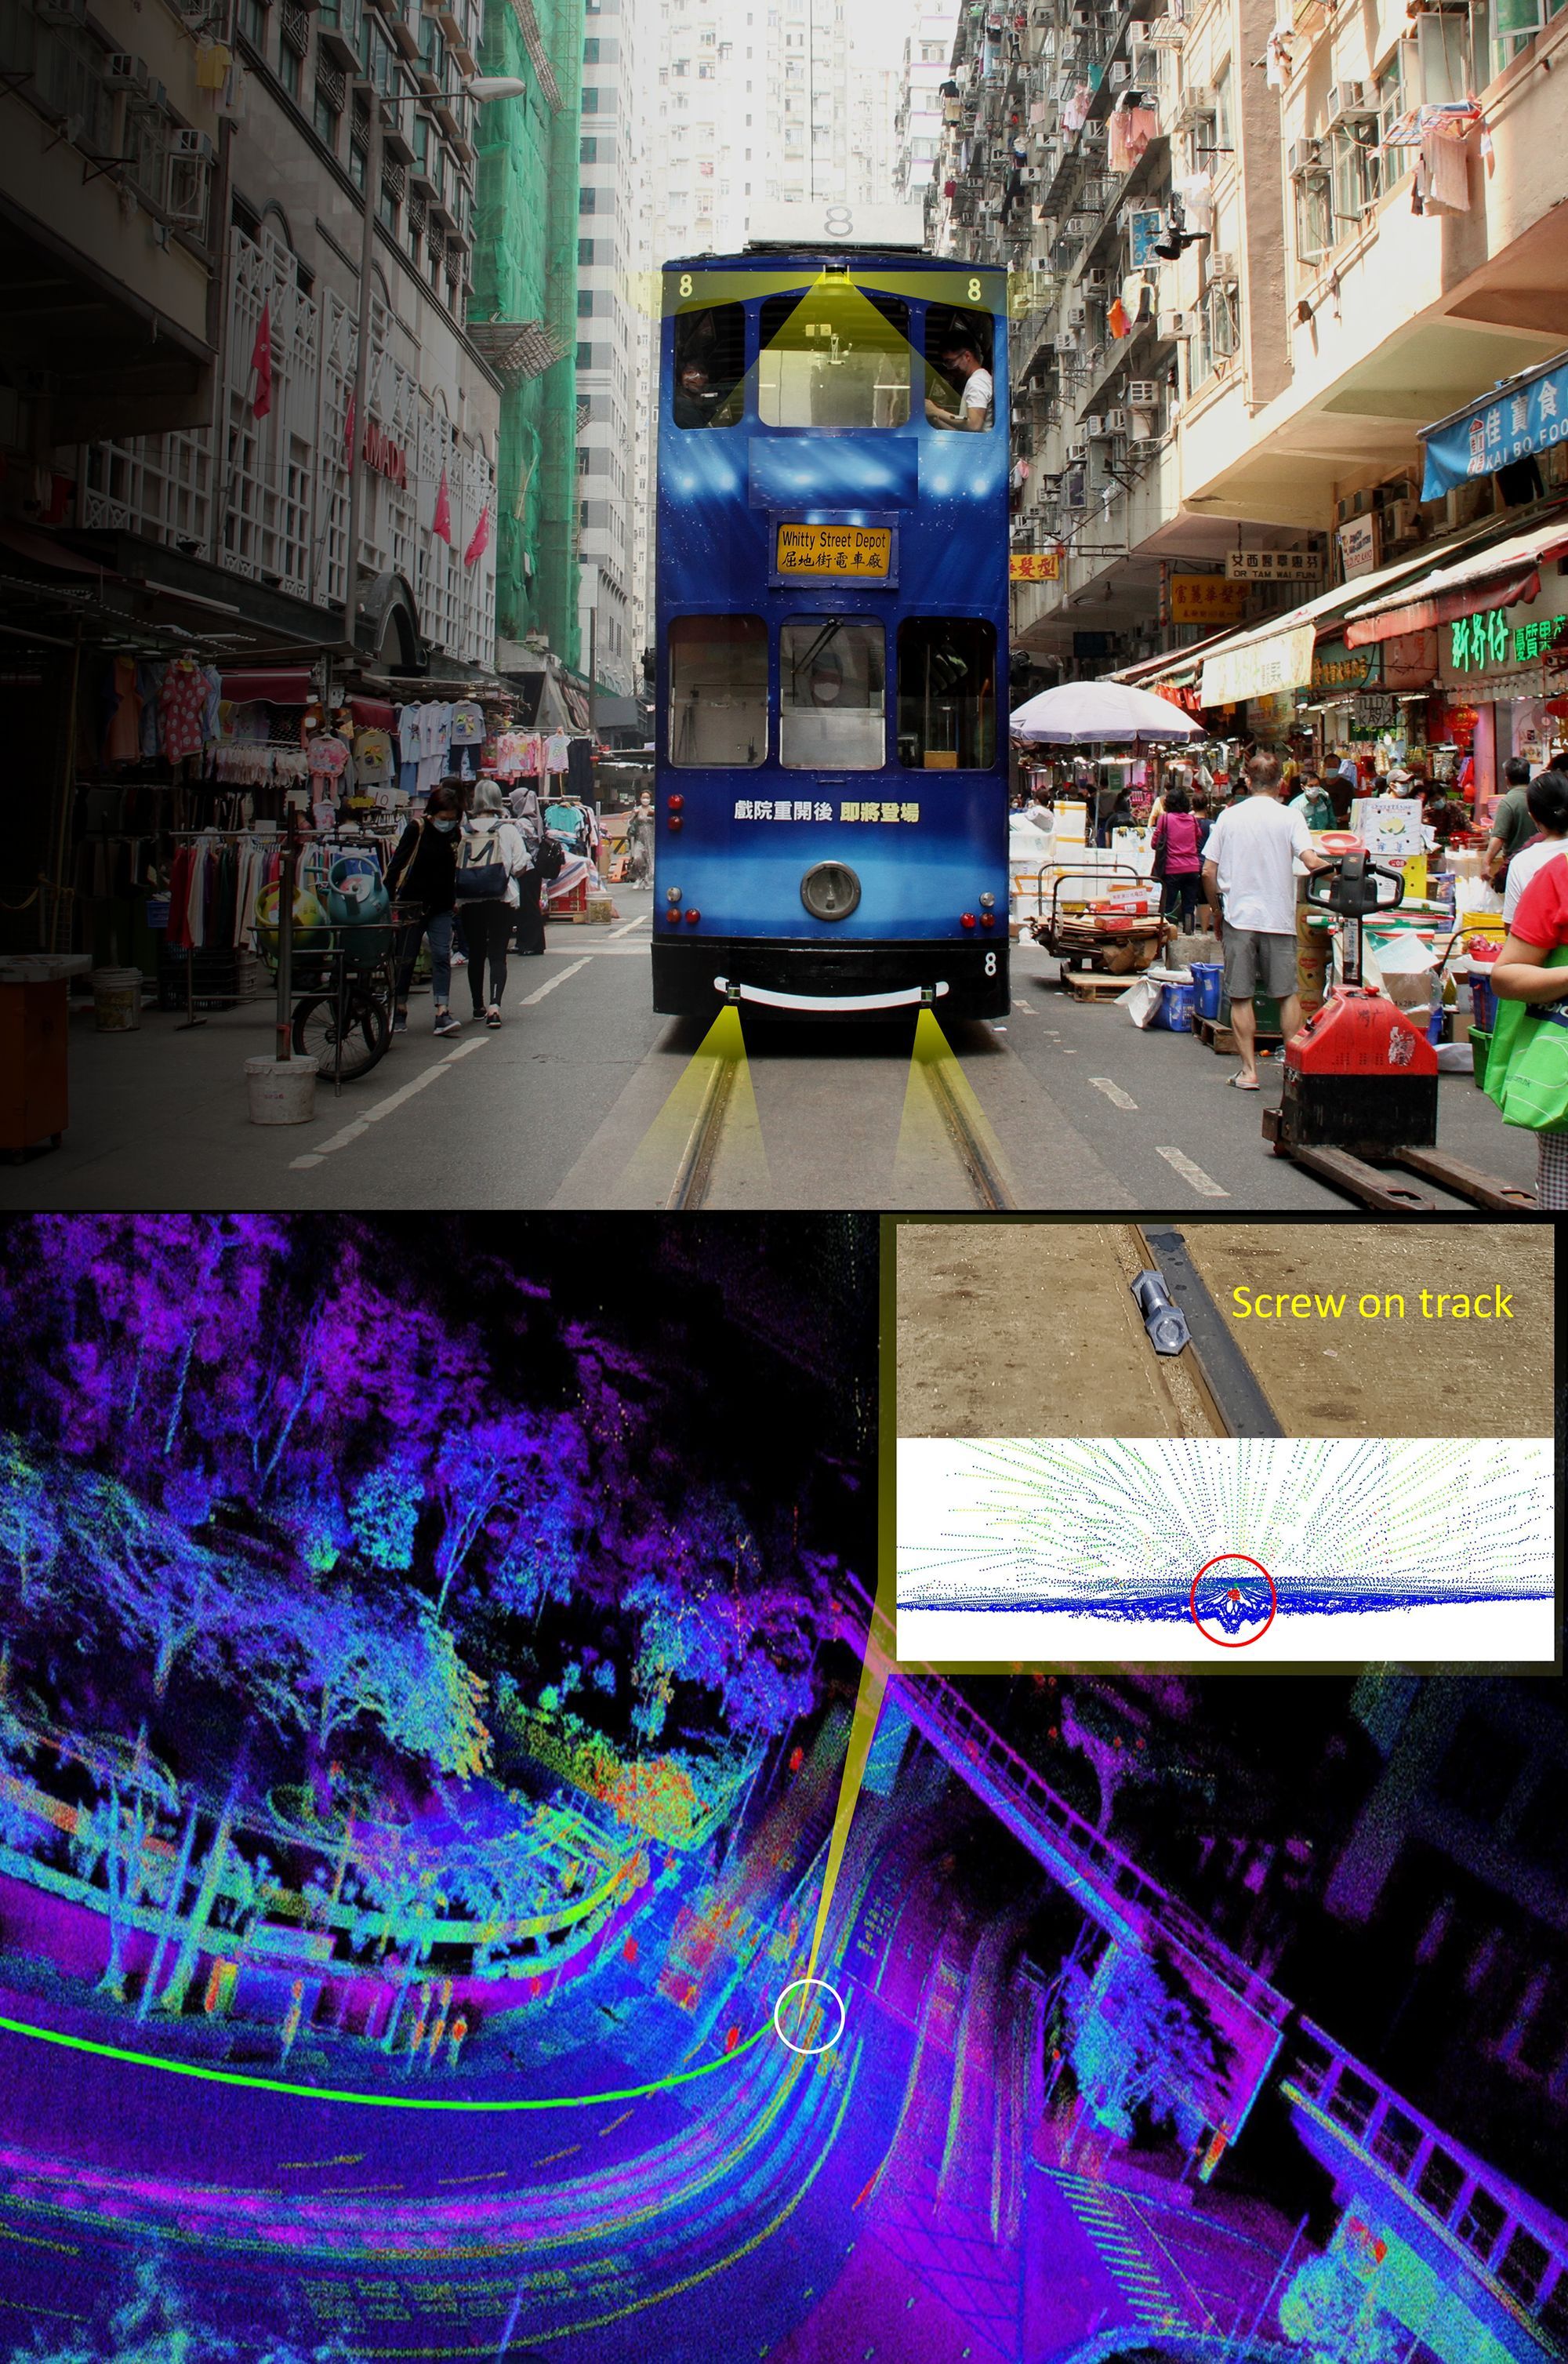 The EMSD and the Hong Kong Tramways have jointly developed a safety system to prevent trams from derailment due to foreign objects. 